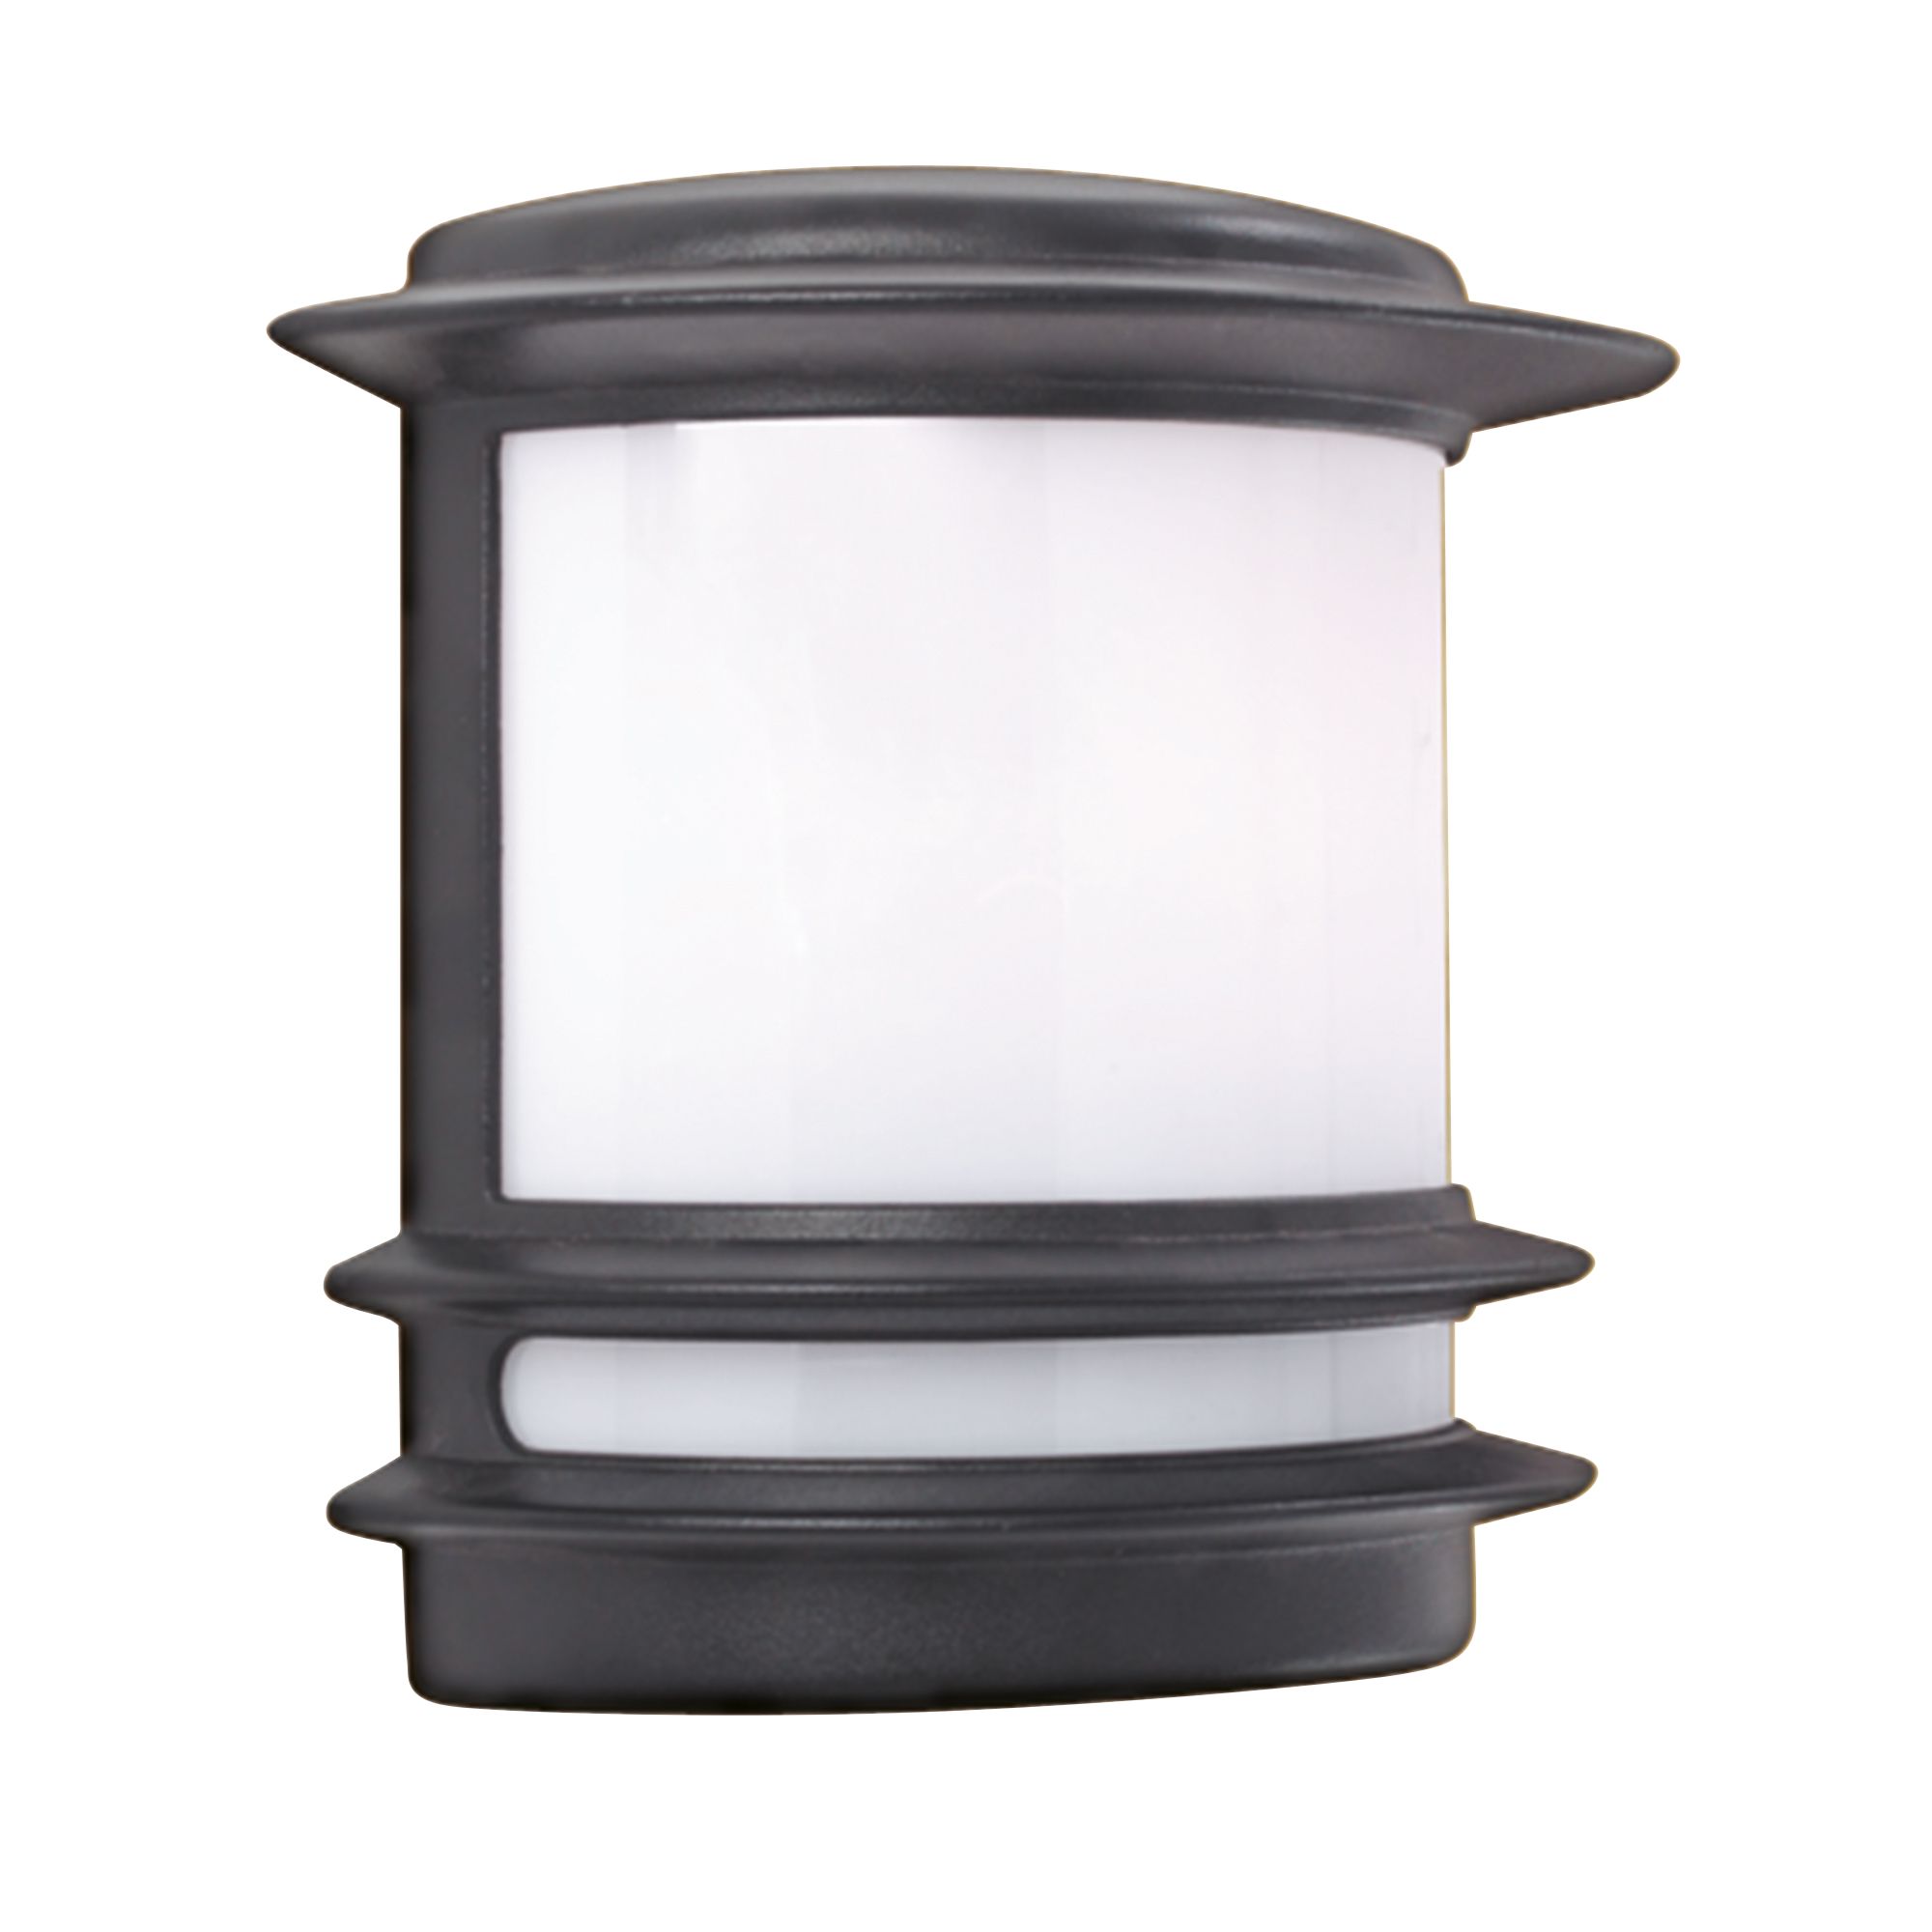 IP44 Outdoor Post Light Opal Polycarbonate Shade